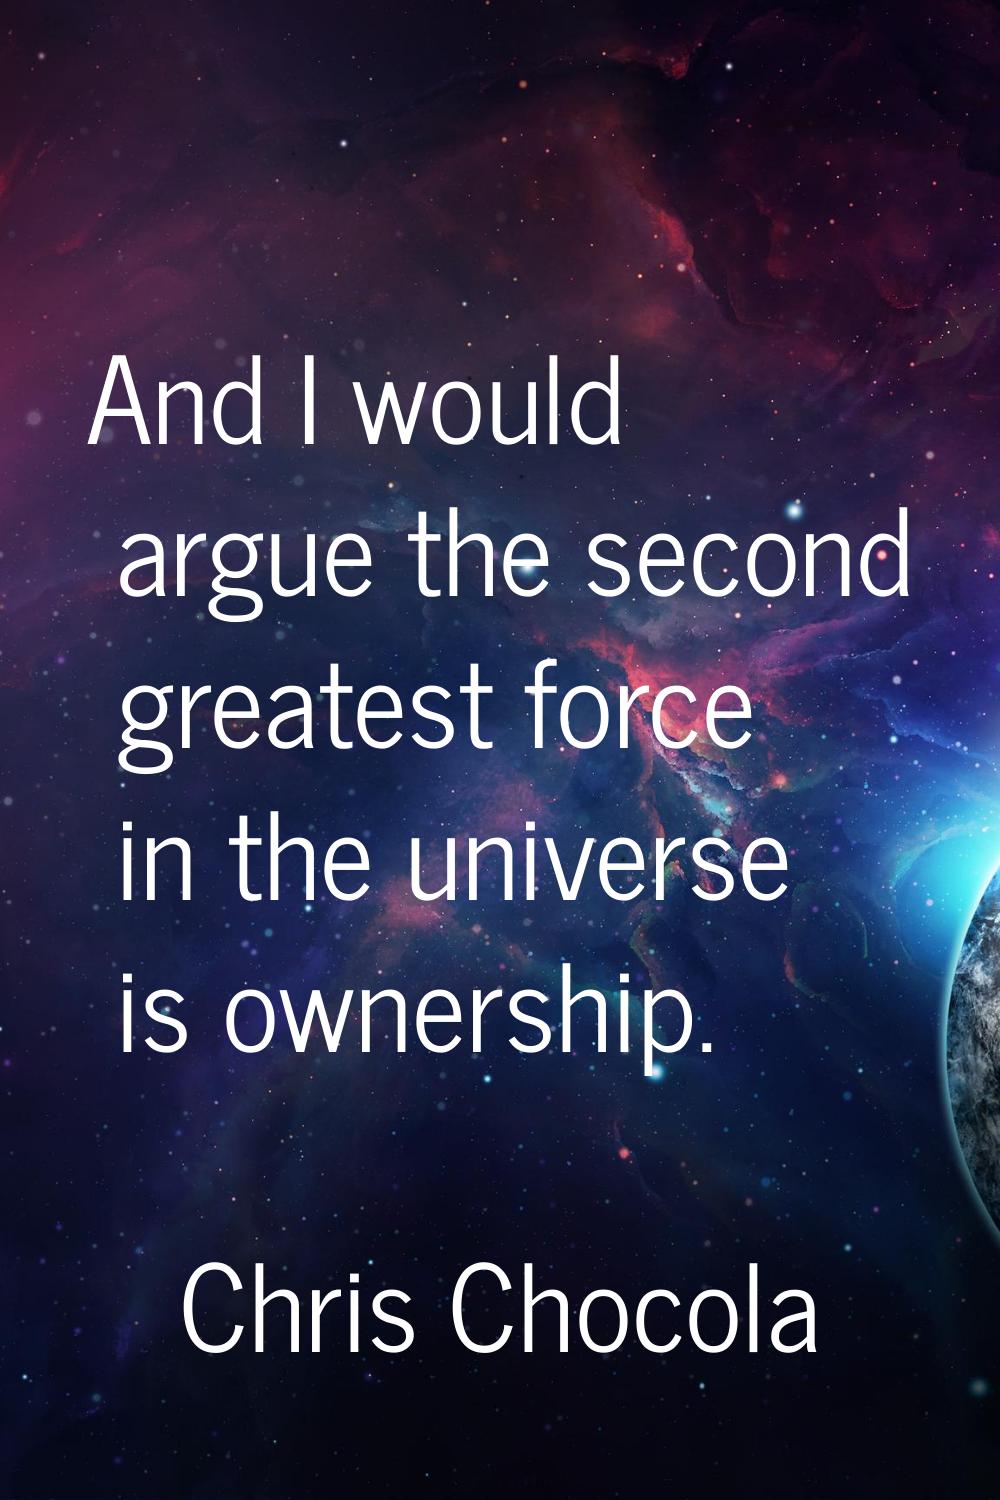 And I would argue the second greatest force in the universe is ownership.